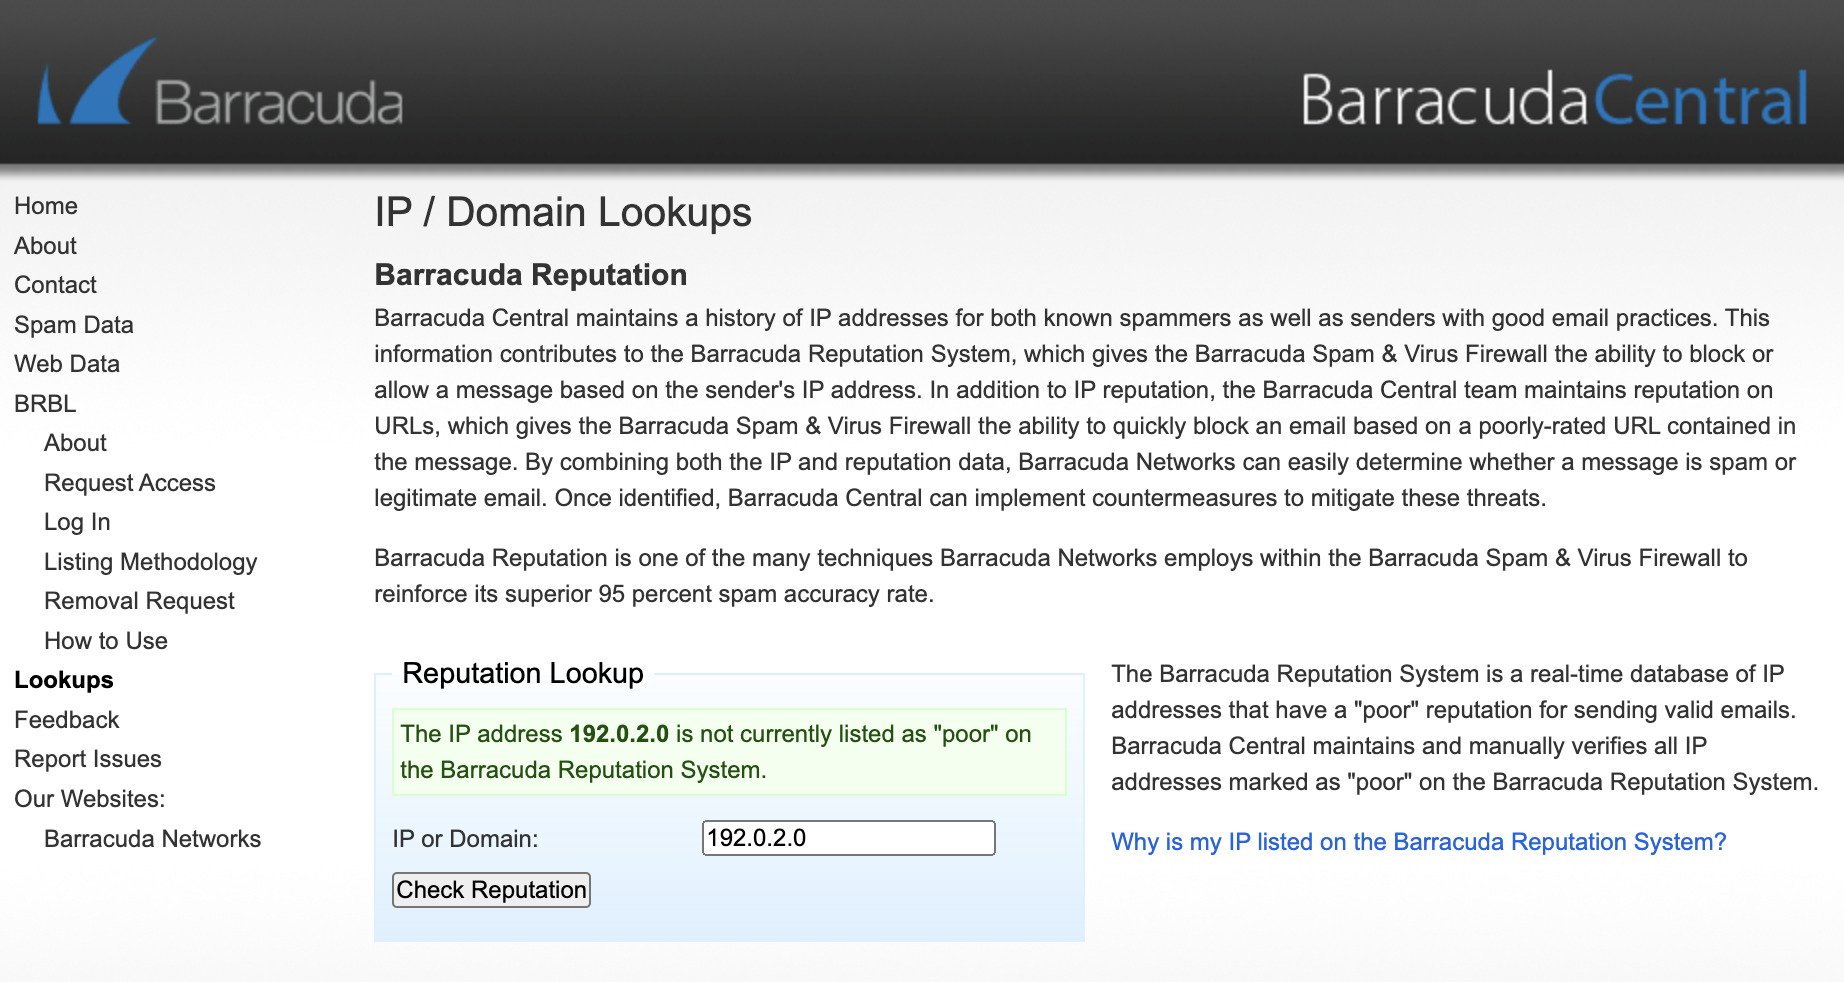 Barracuda Central IP reputation lookup results 